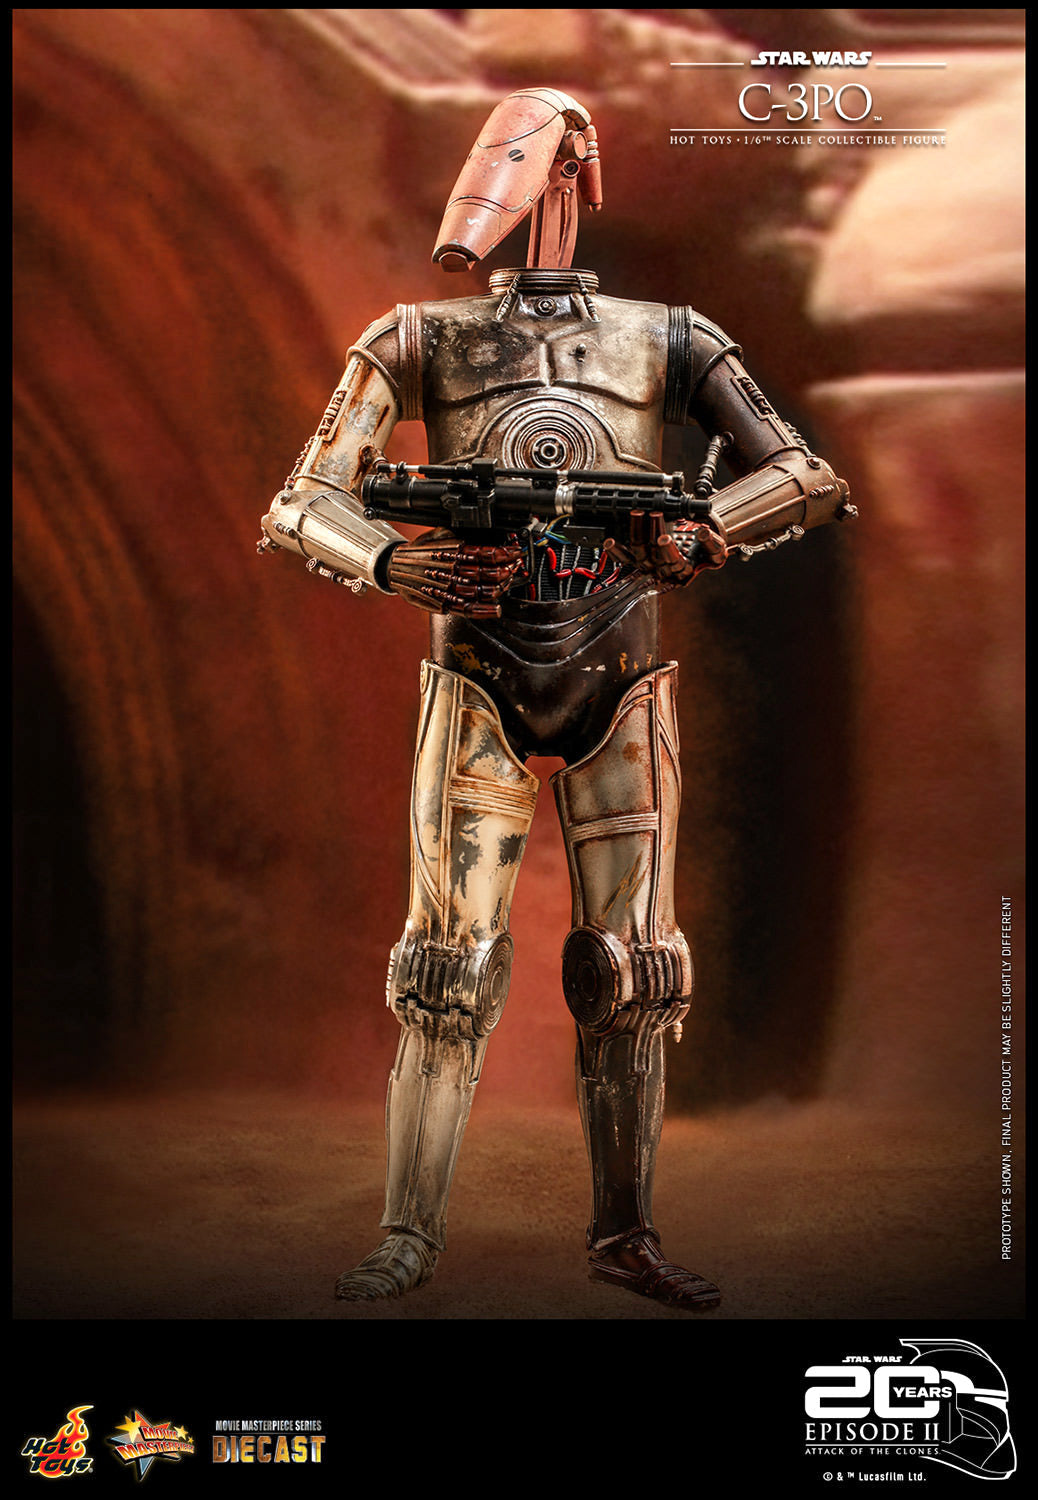 C-3PO with battle droid head (Star Wars: Attack of the Clones) 20th Anniversary 1:6 Diecast Figure by Hot Toys